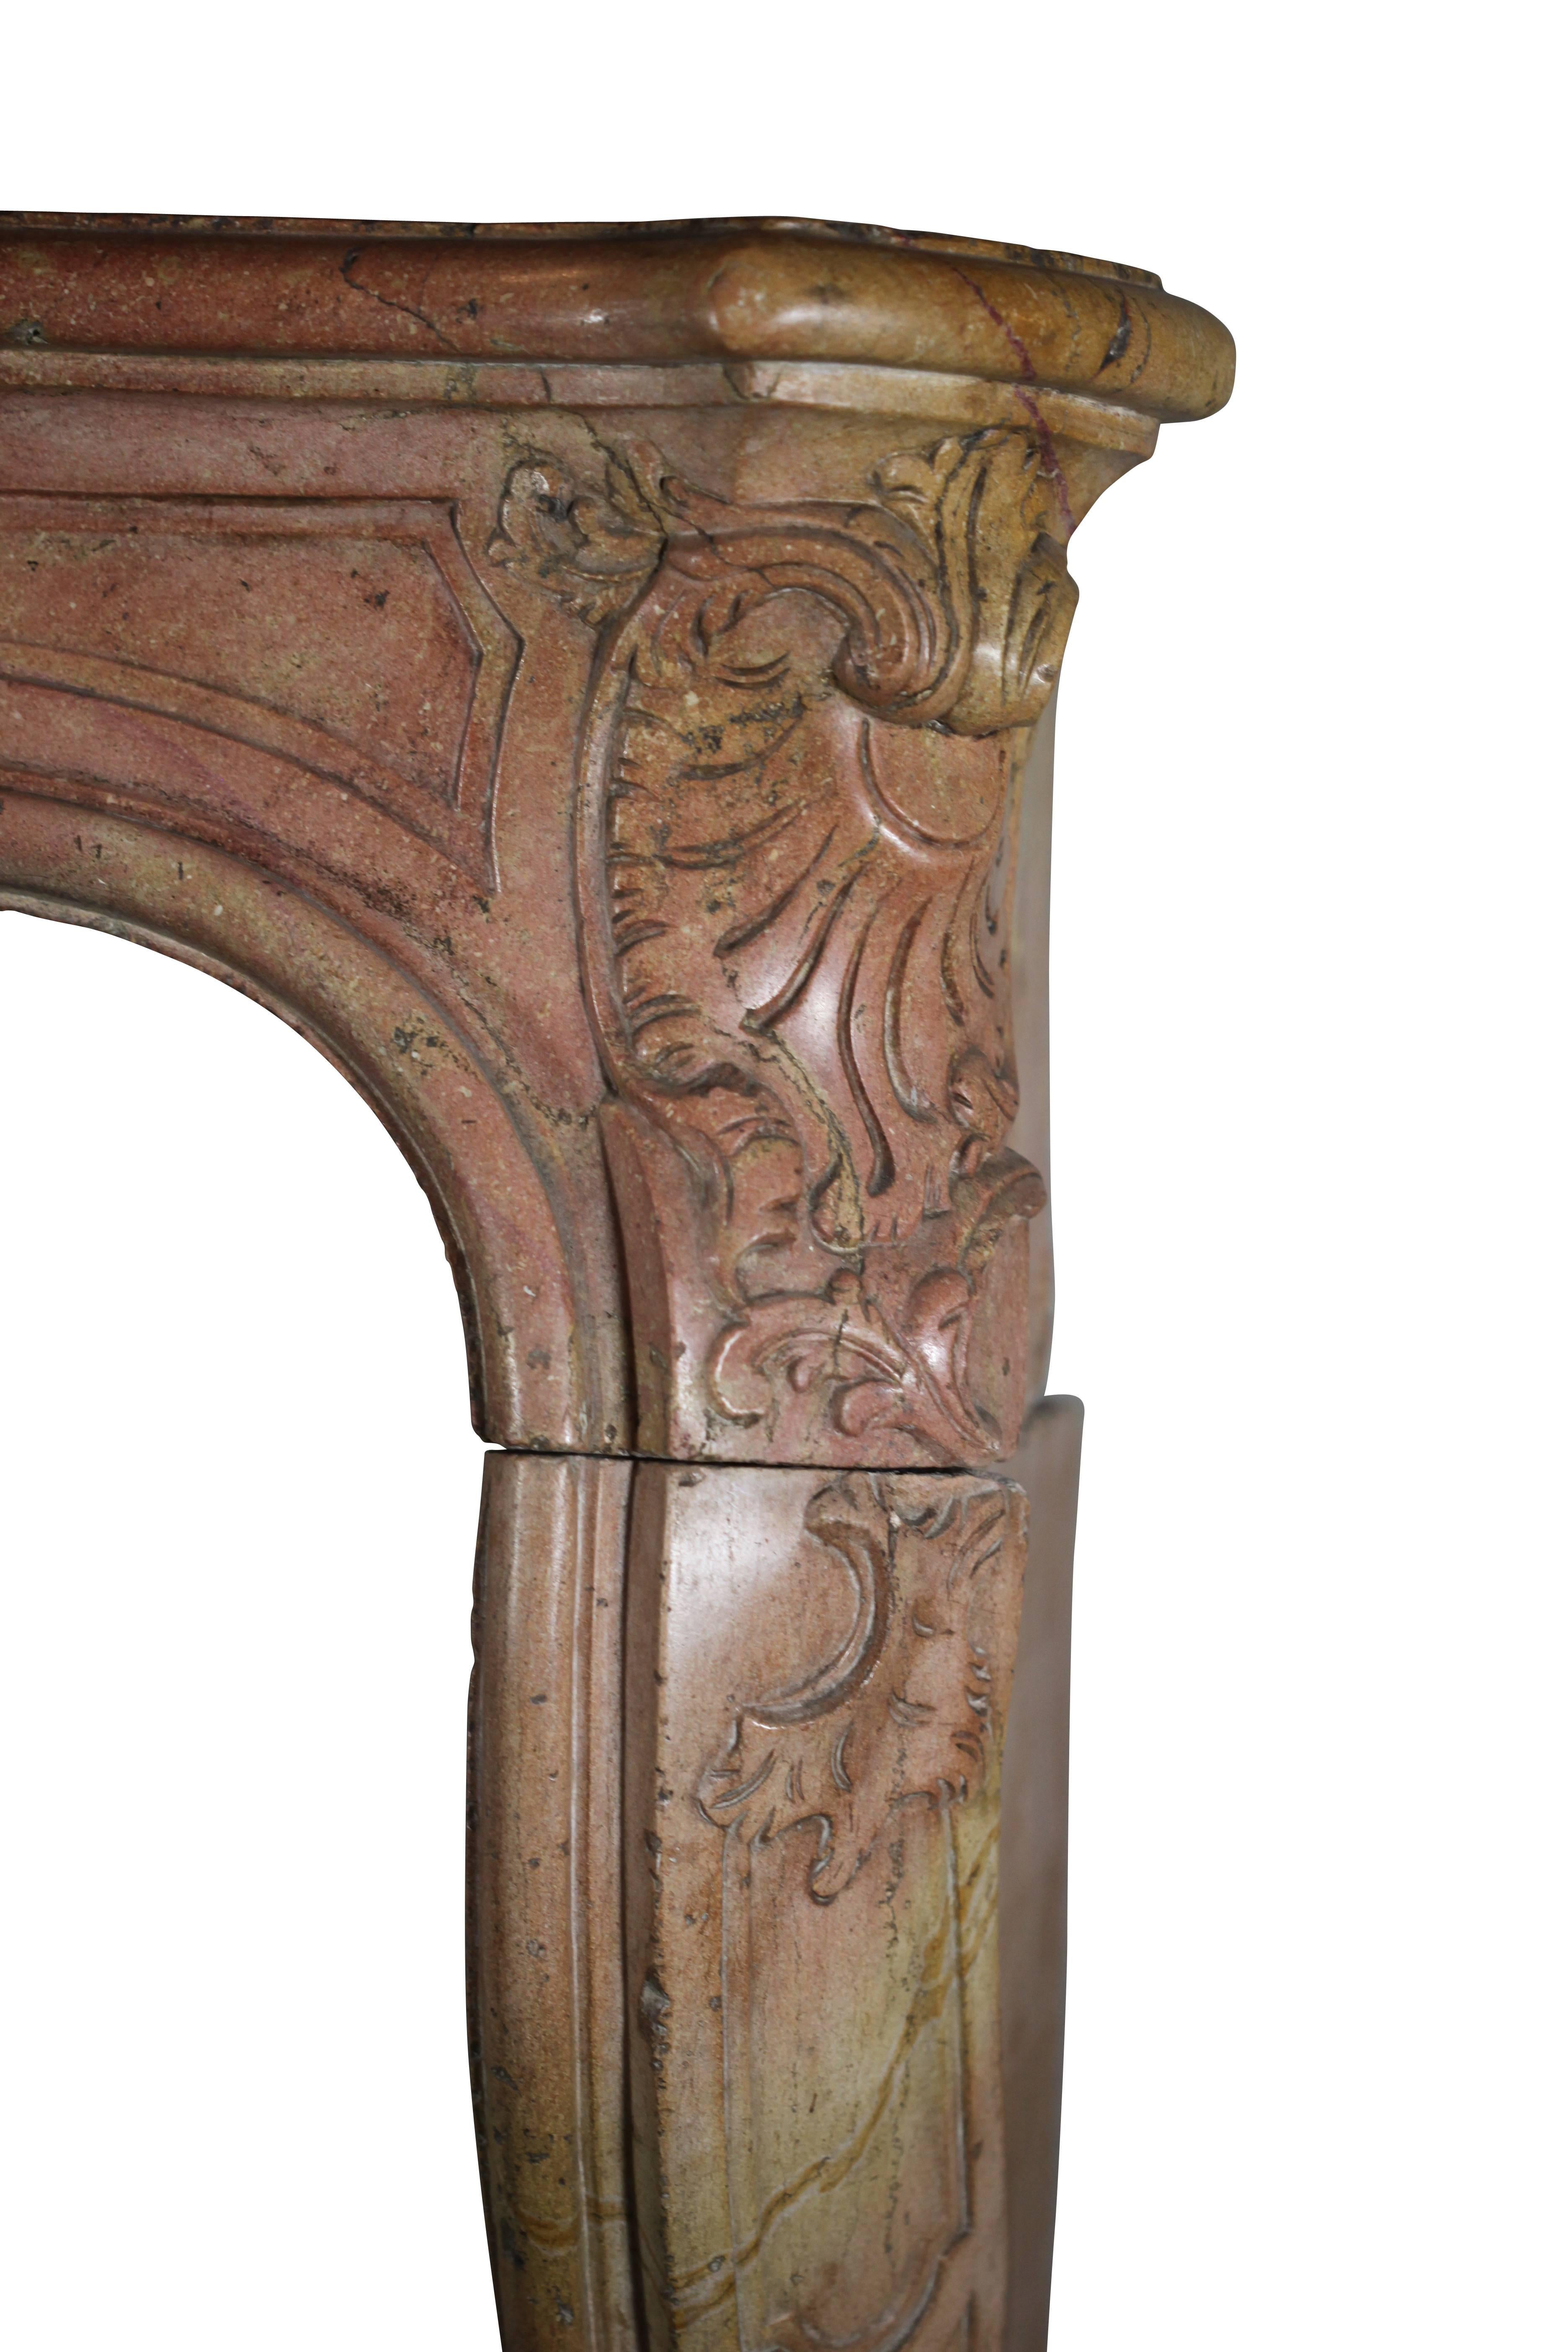 18th Century Antique Fireplace Mantel in Burgundy Bicolor Hard Stone For Sale 2